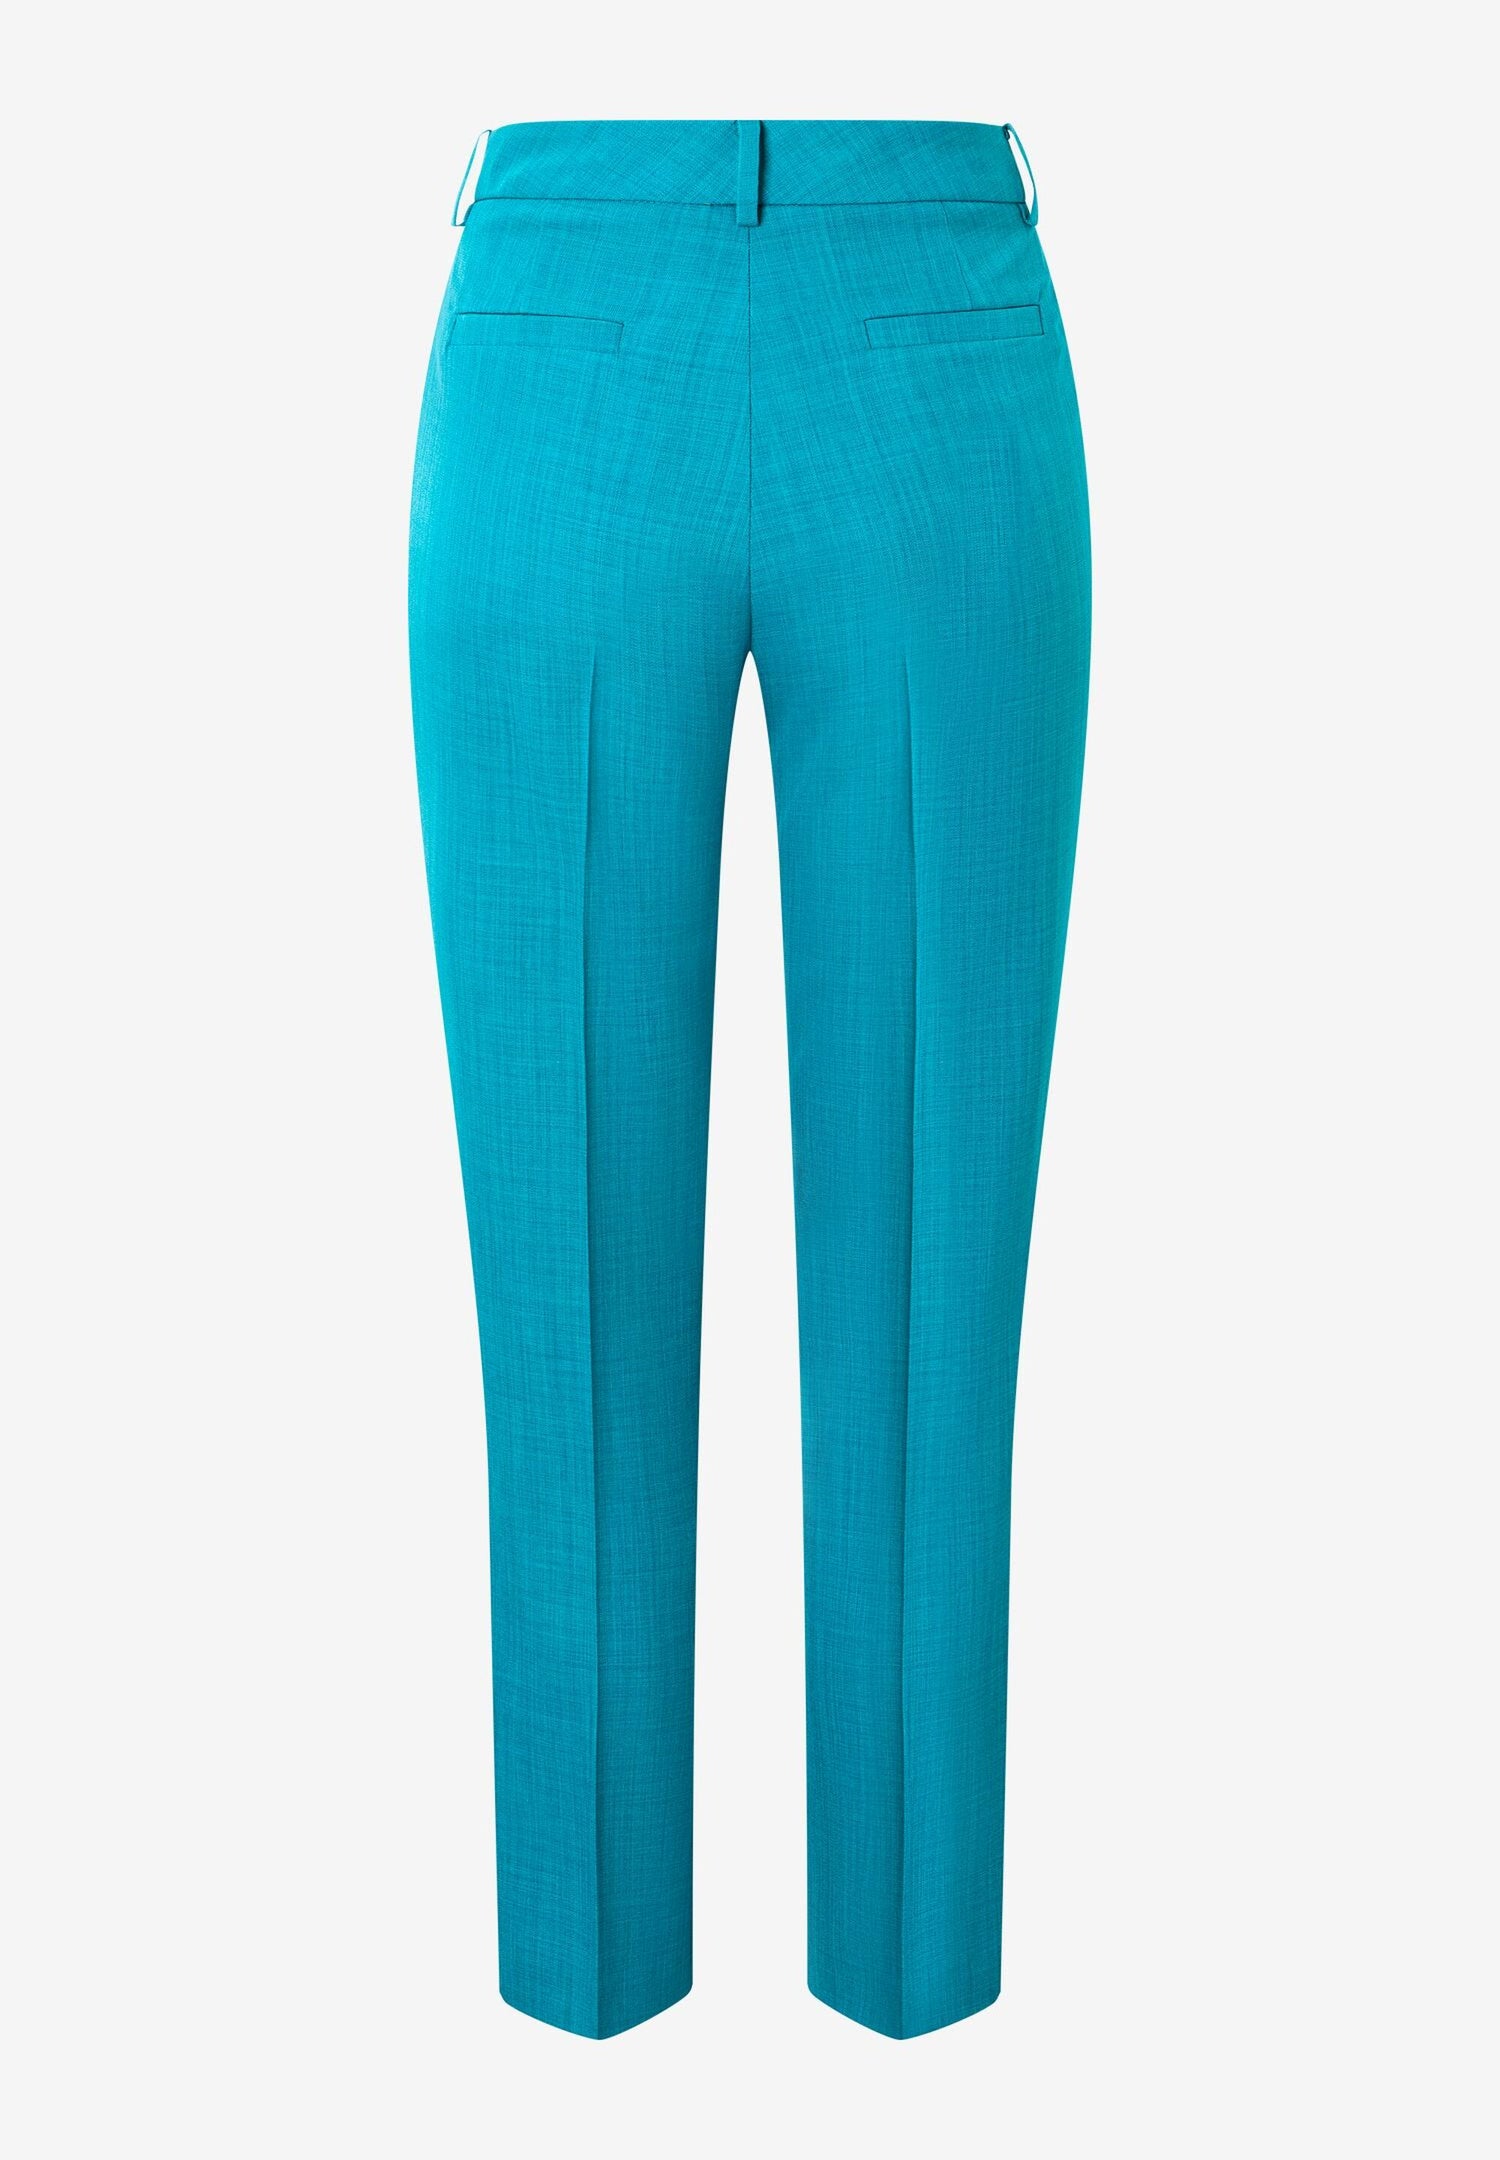 Blue Cropped Dress Trousers_05